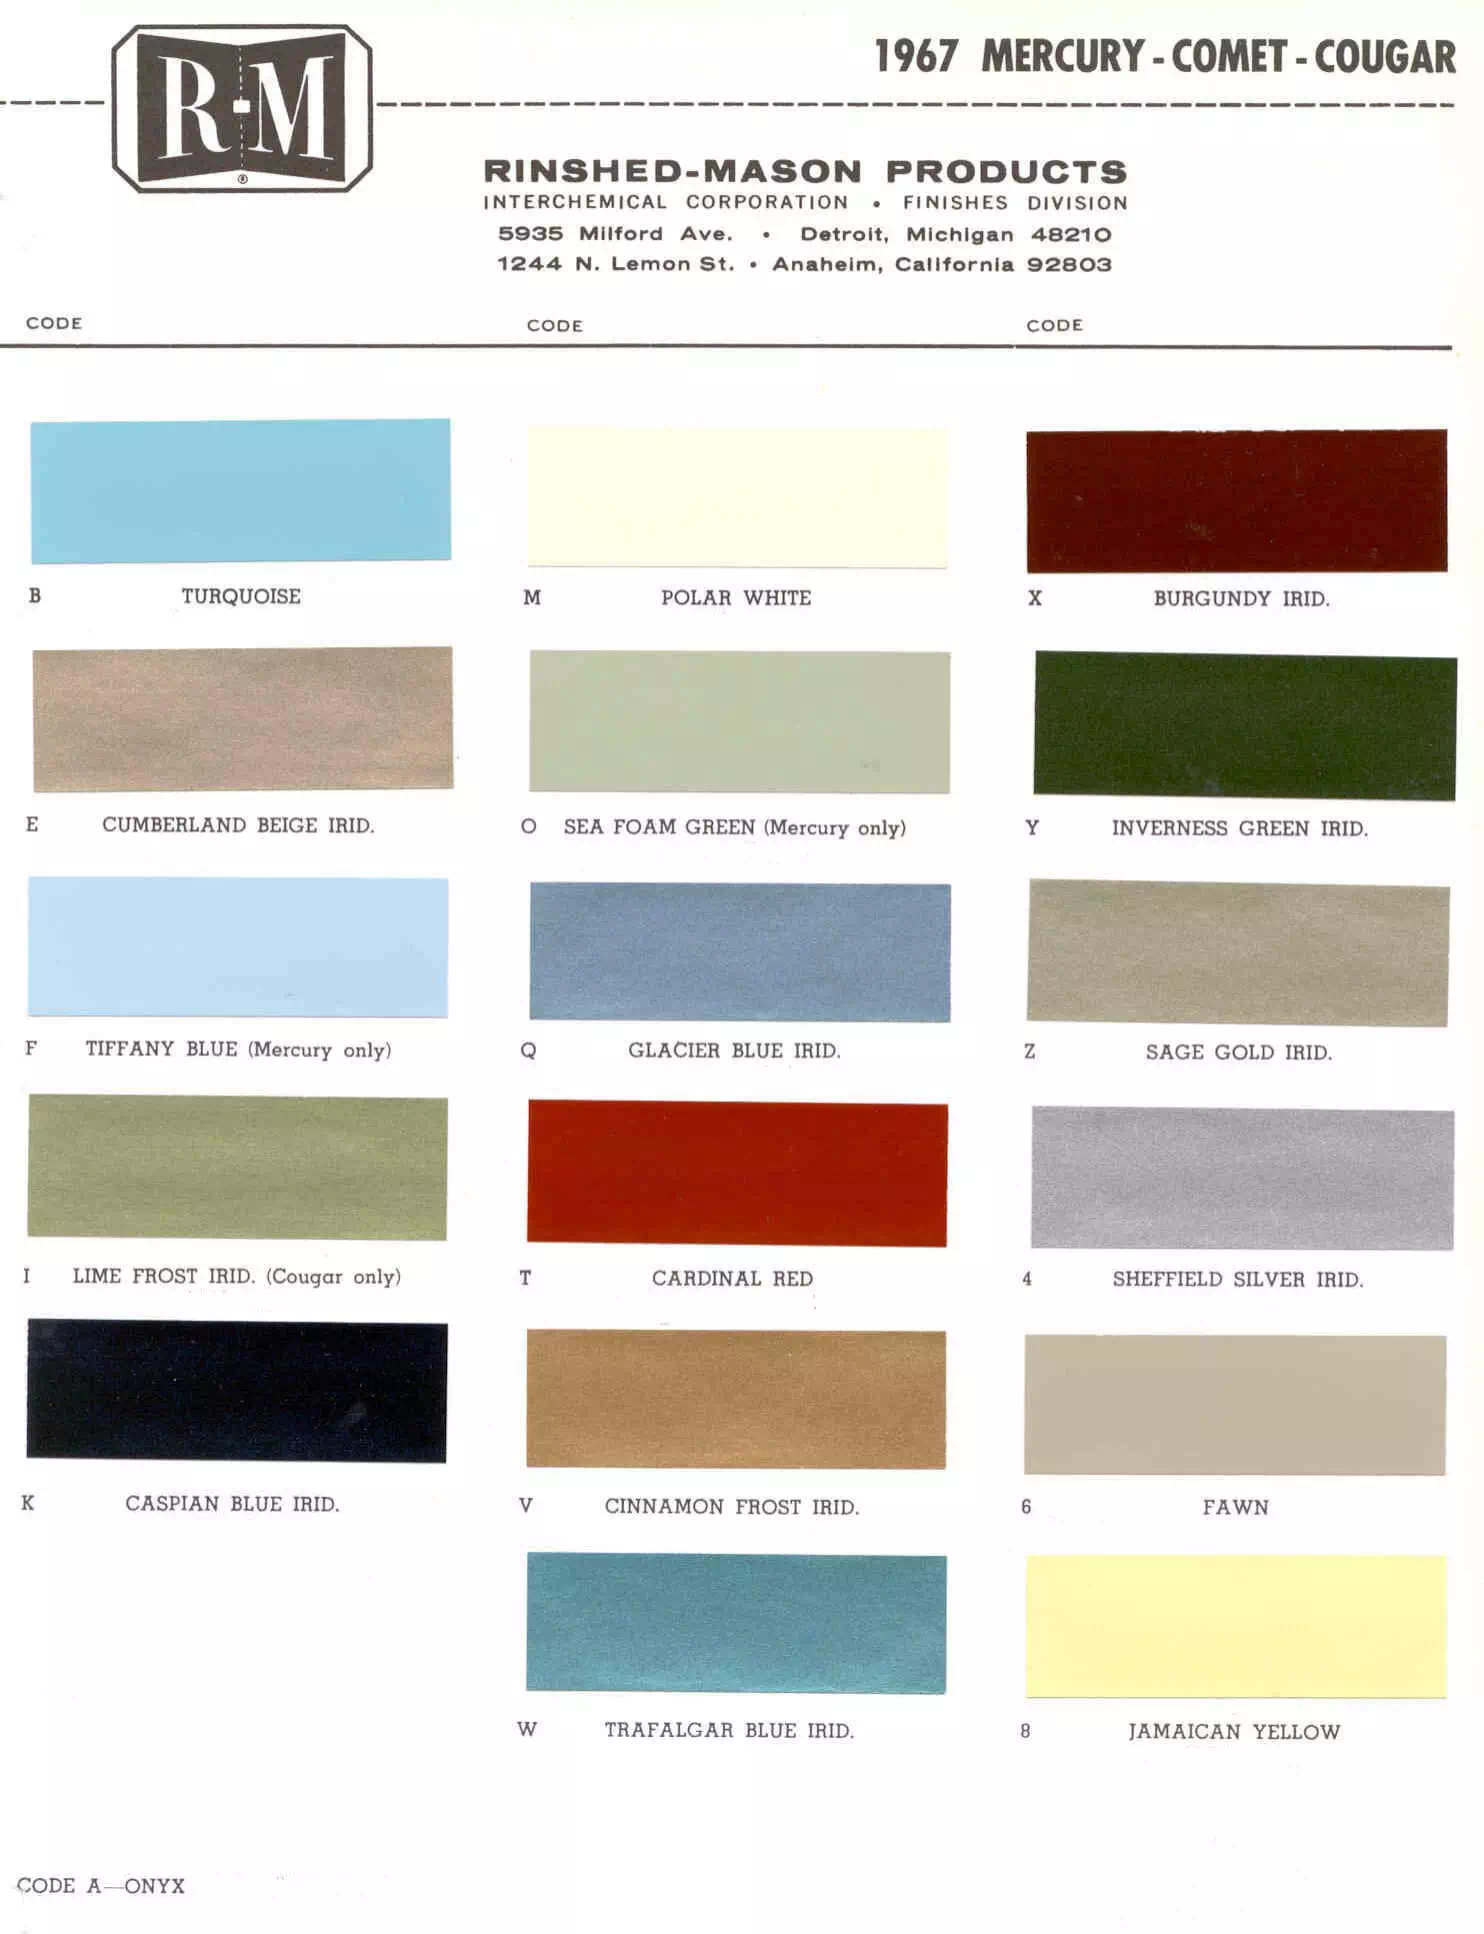 Color examples, Ordering Codes, OEM Paint Code, Color Swatches, and Color Names for the Ford Motor Company in 1967